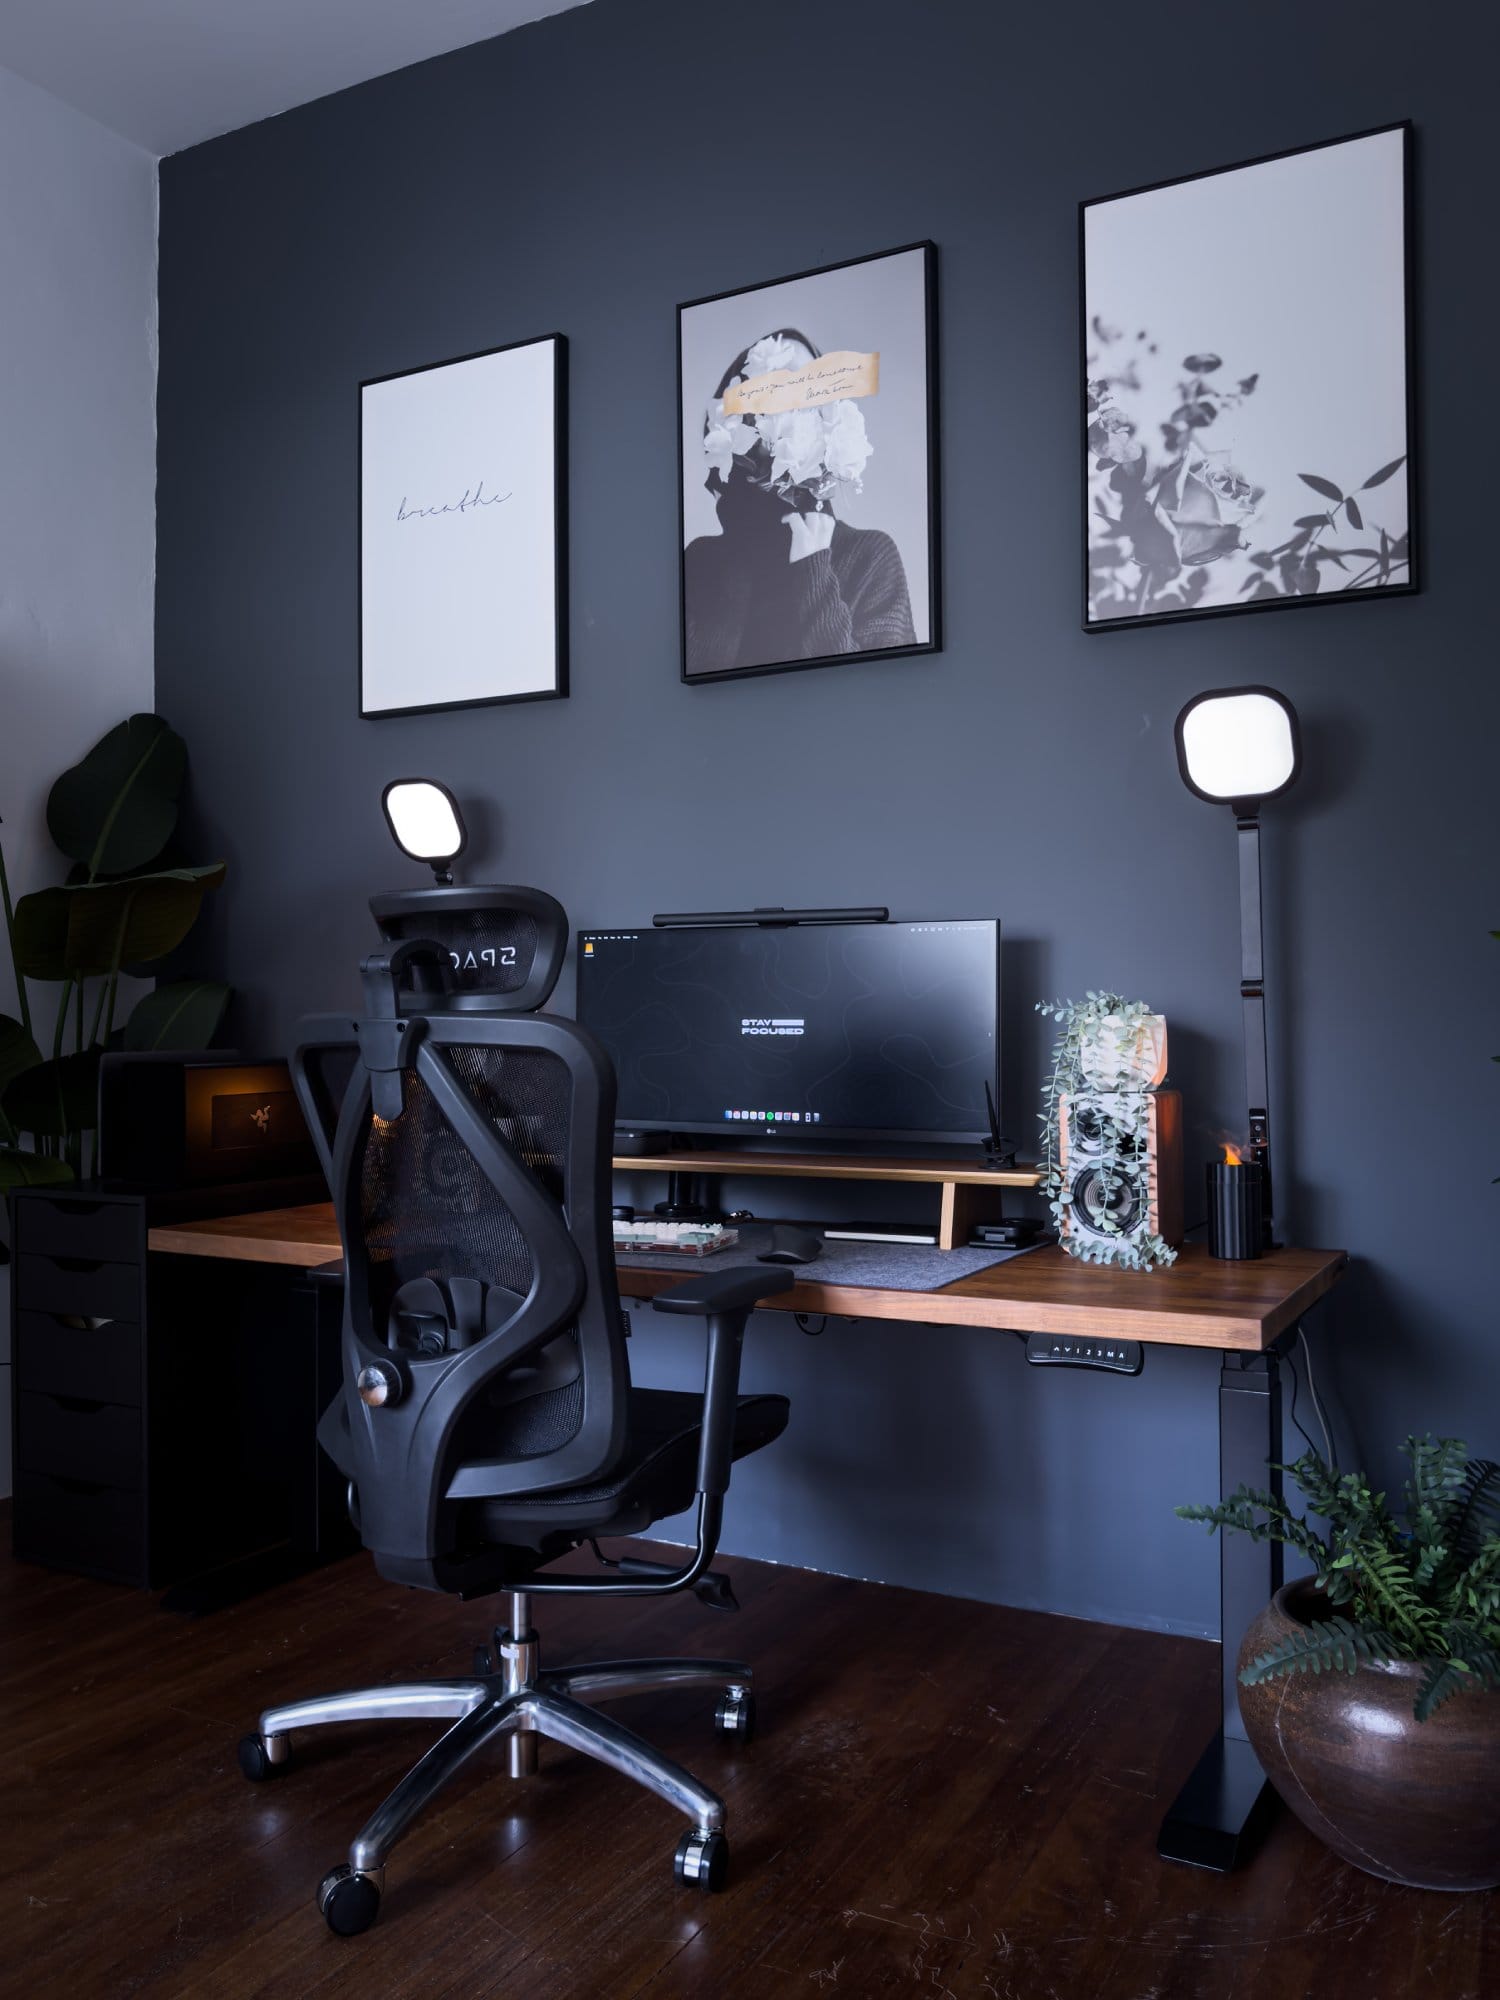 A home office setup featuring an LG 34WK650 monitor, illuminated by a Xiaomi Light Bar, accompanied by a Switch Couture Frosted Acrylic Alice keyboard, Logitech MX Master 3 mouse, and Edifier R1280T speakers, with a MacBook Pro 2018 housed in a Razer Core X eGPU, and and a SPACE Ergonomic Seat Pro chair